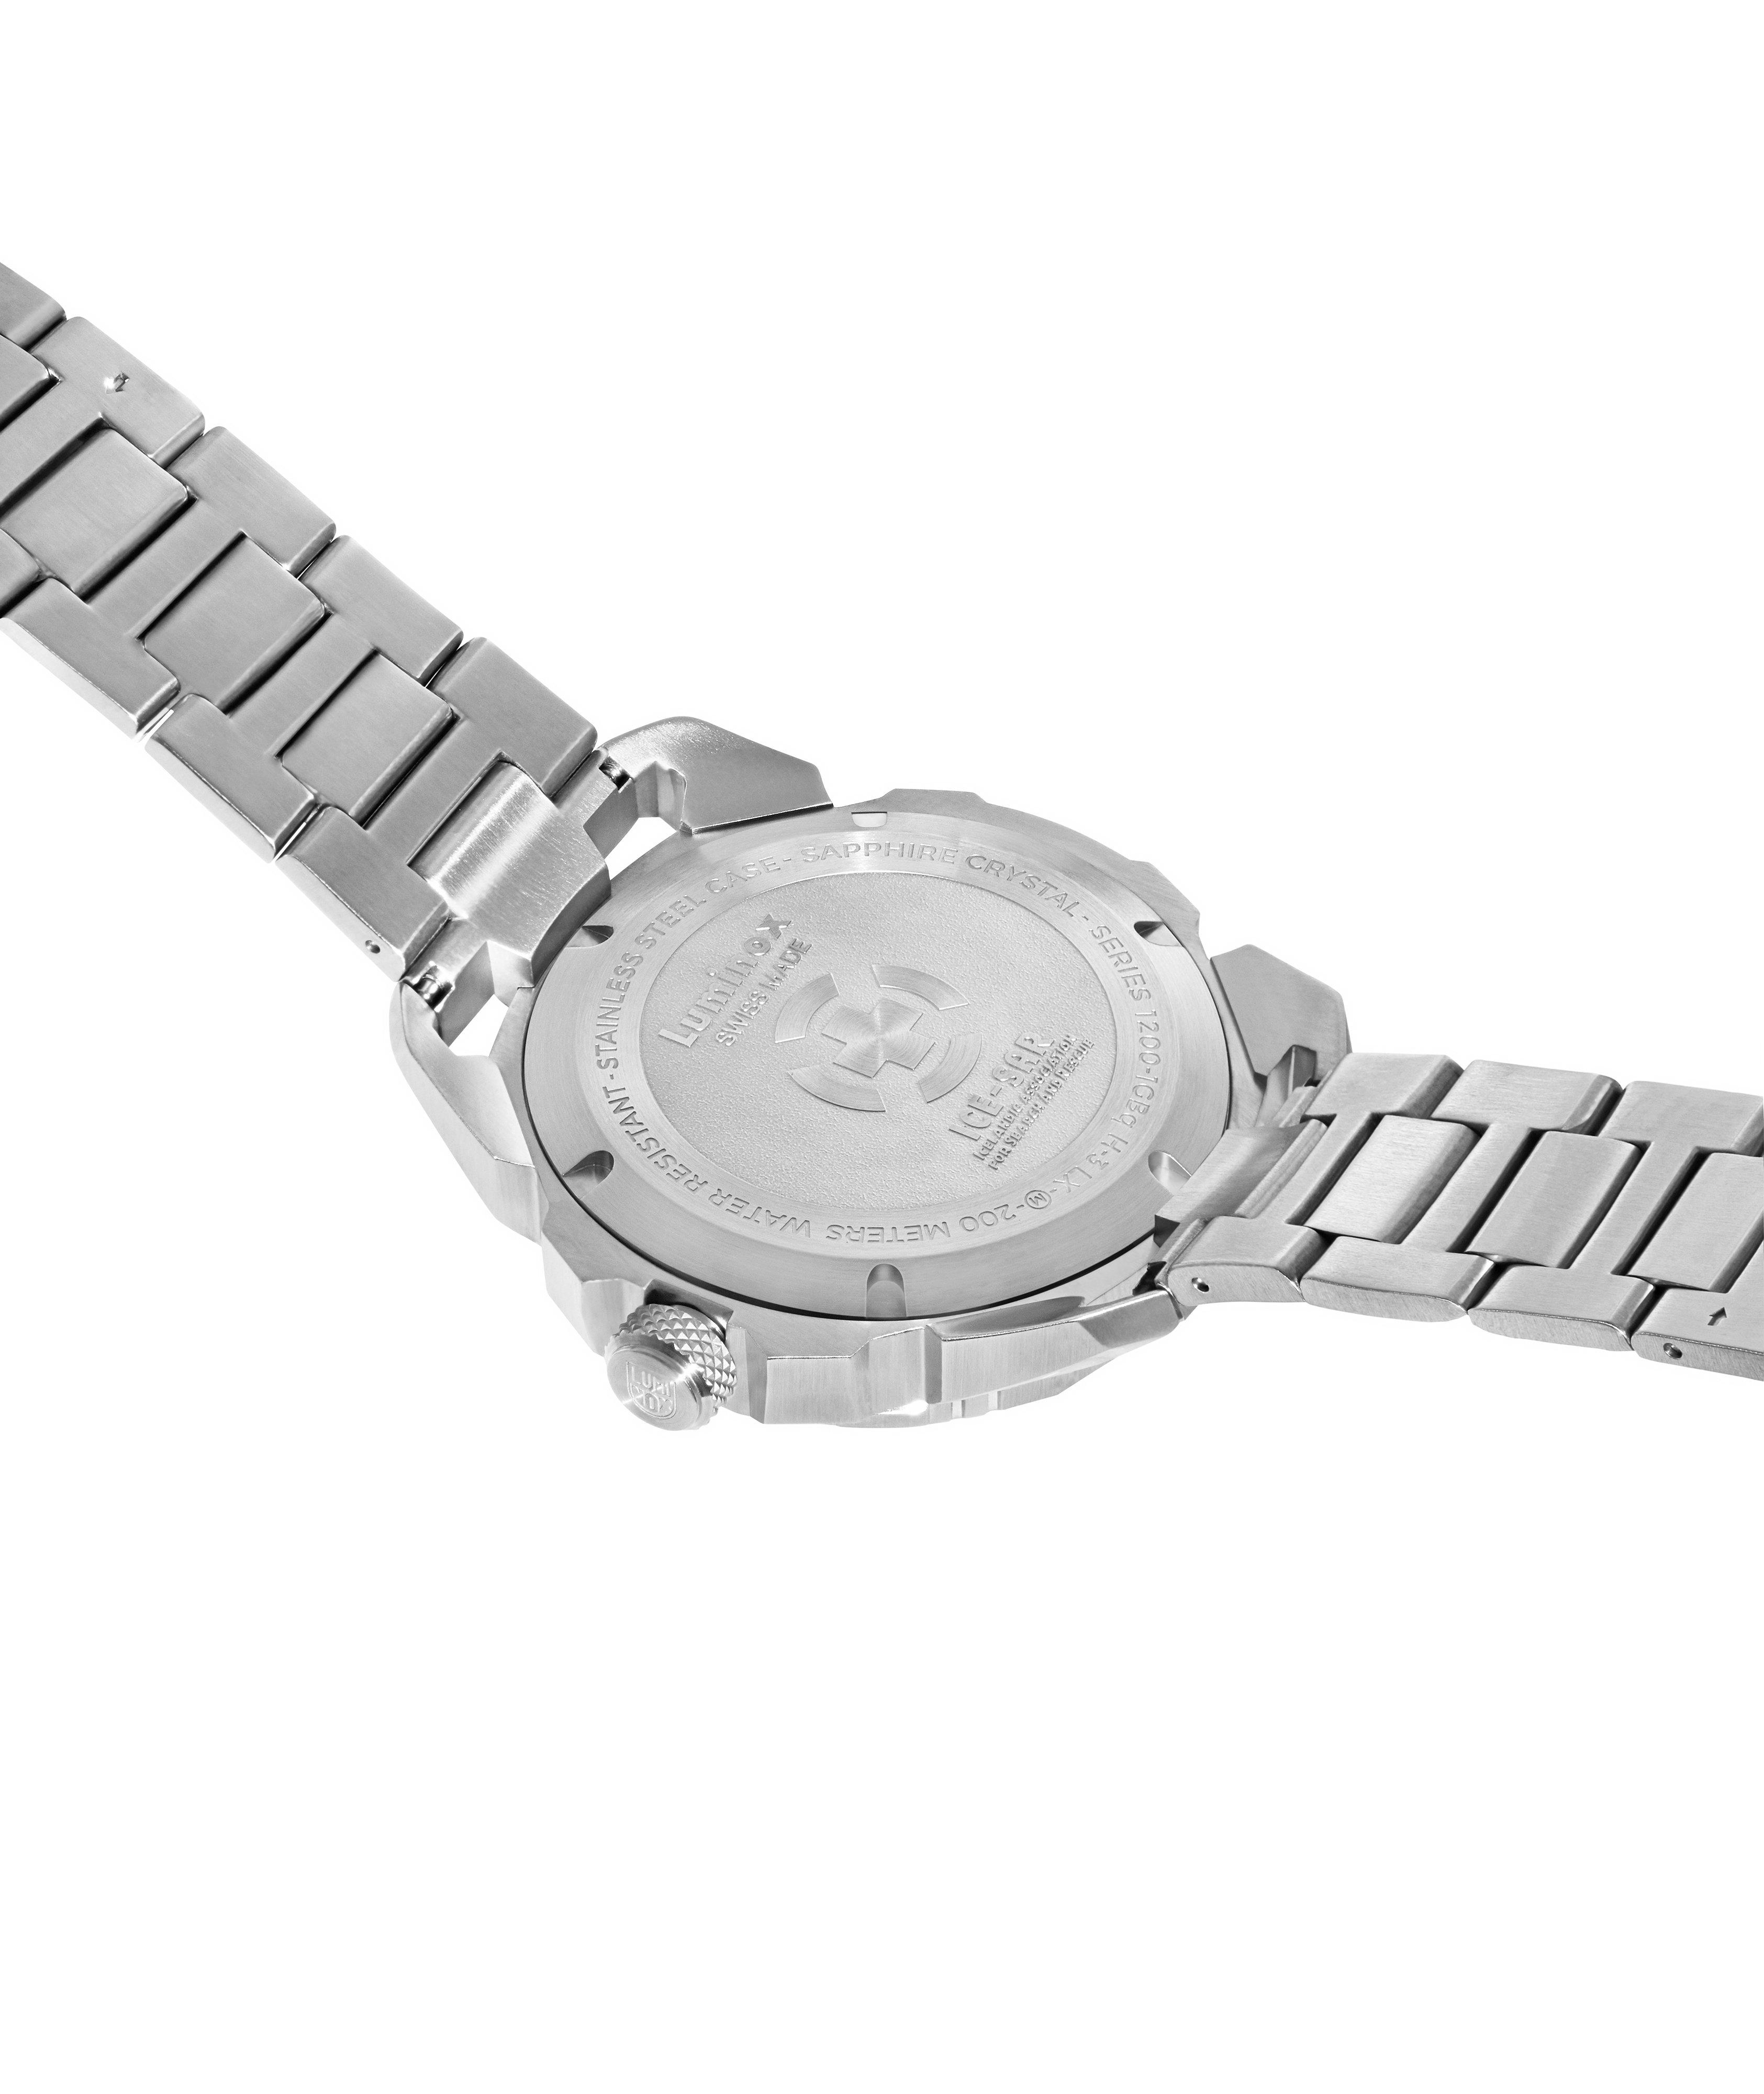 Montre 1202, collection Ice-Sar Arctic image 3